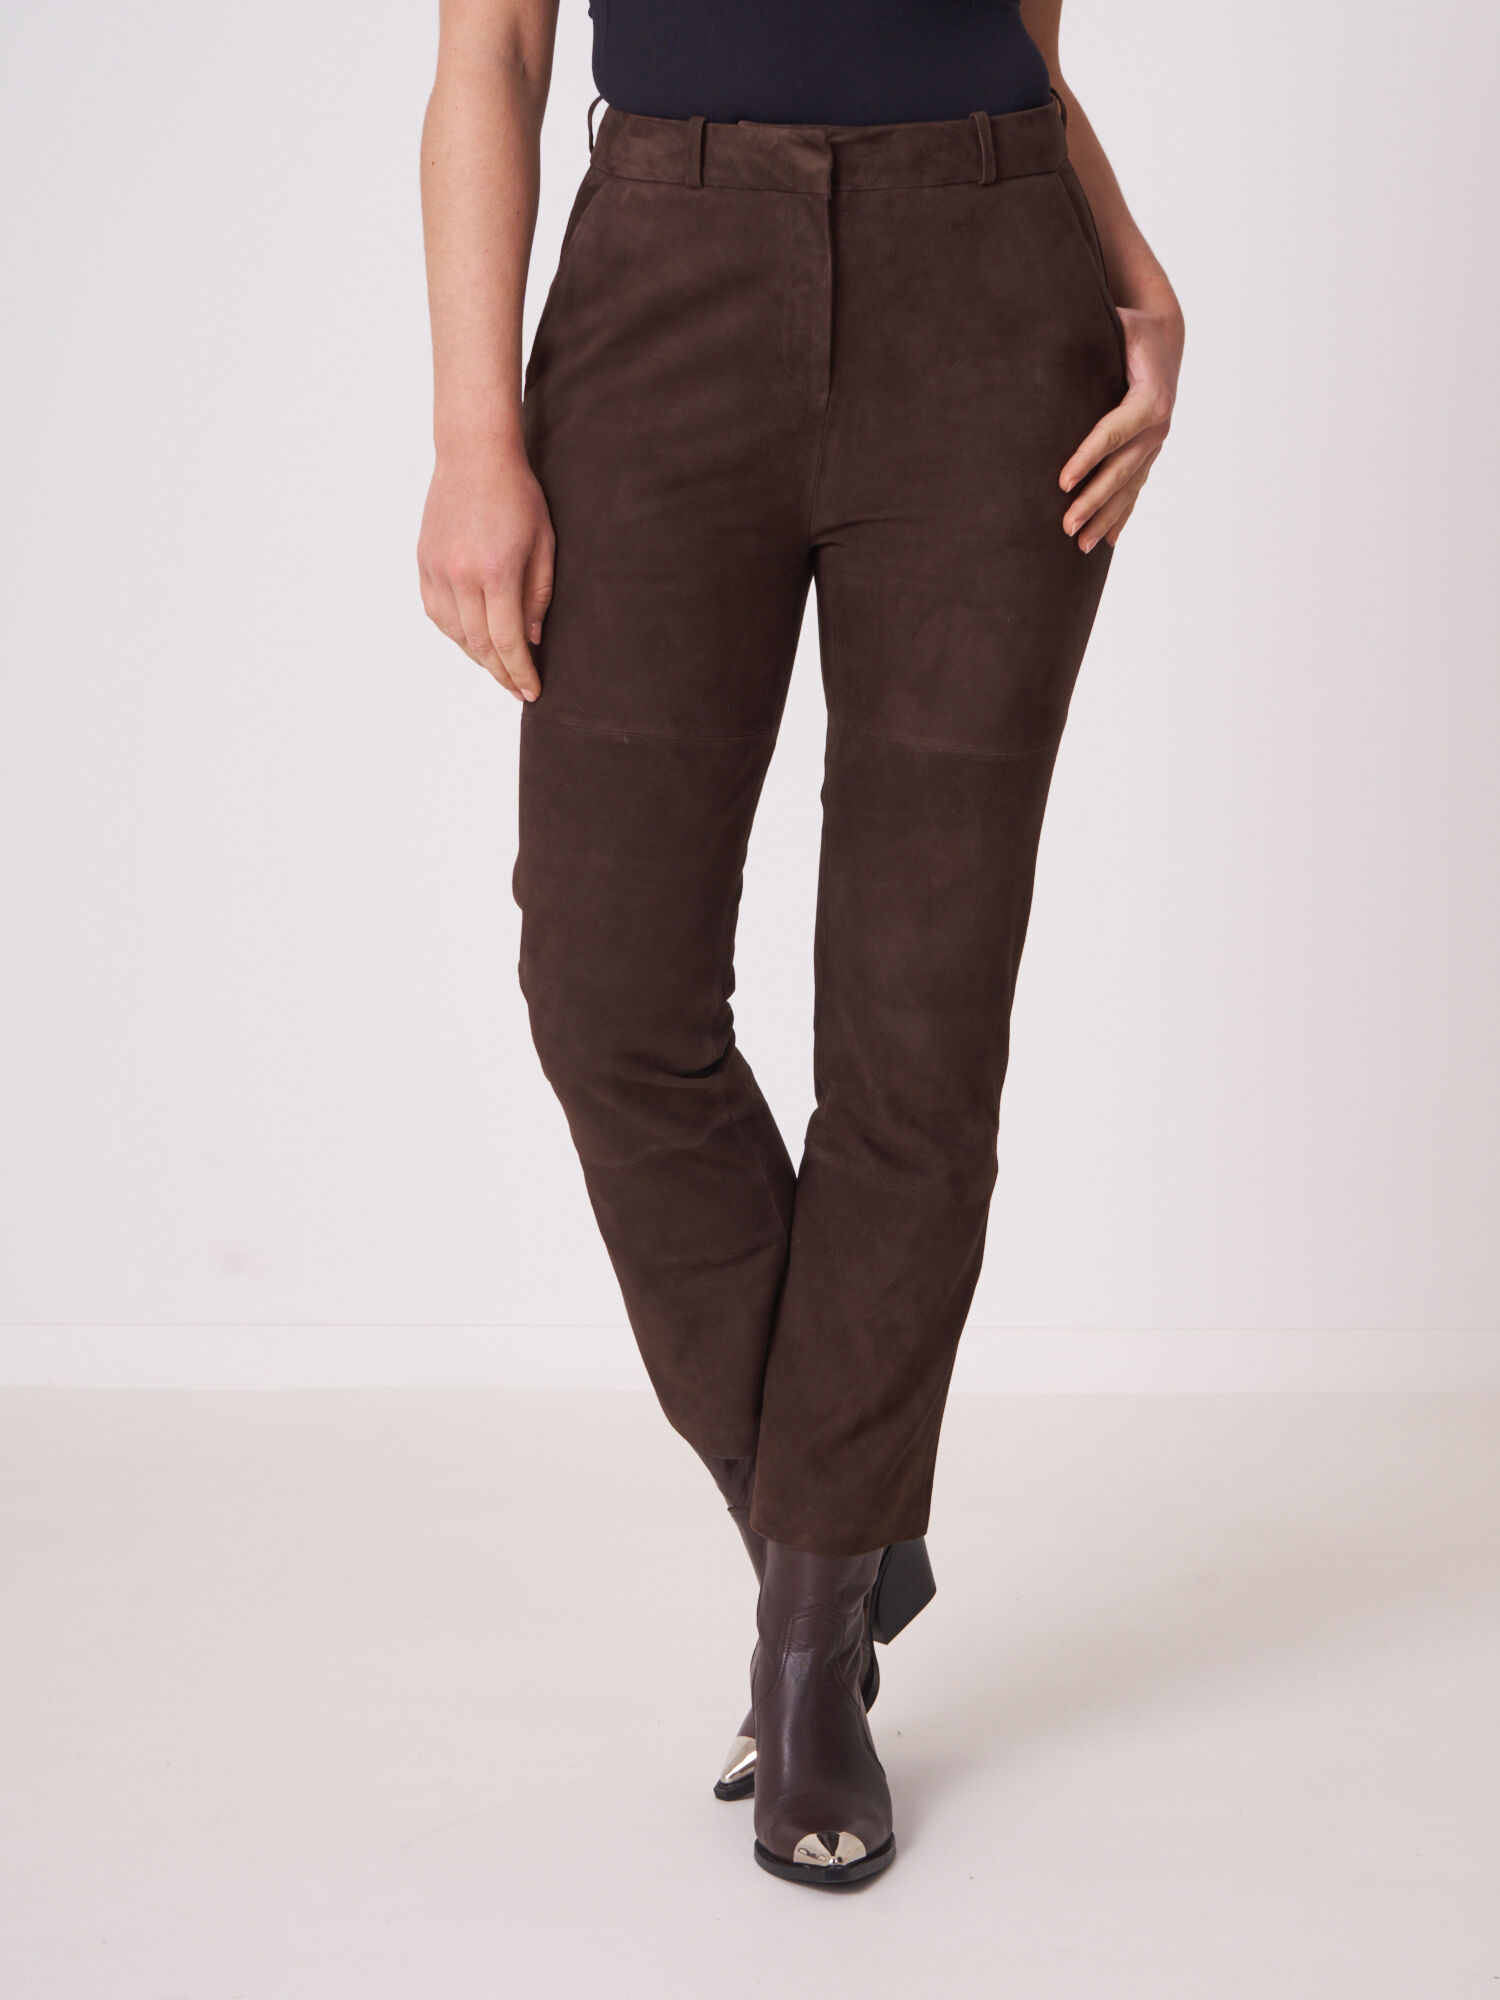 UO Western Faux Suede Micro-Bootcut Pant | Urban Outfitters